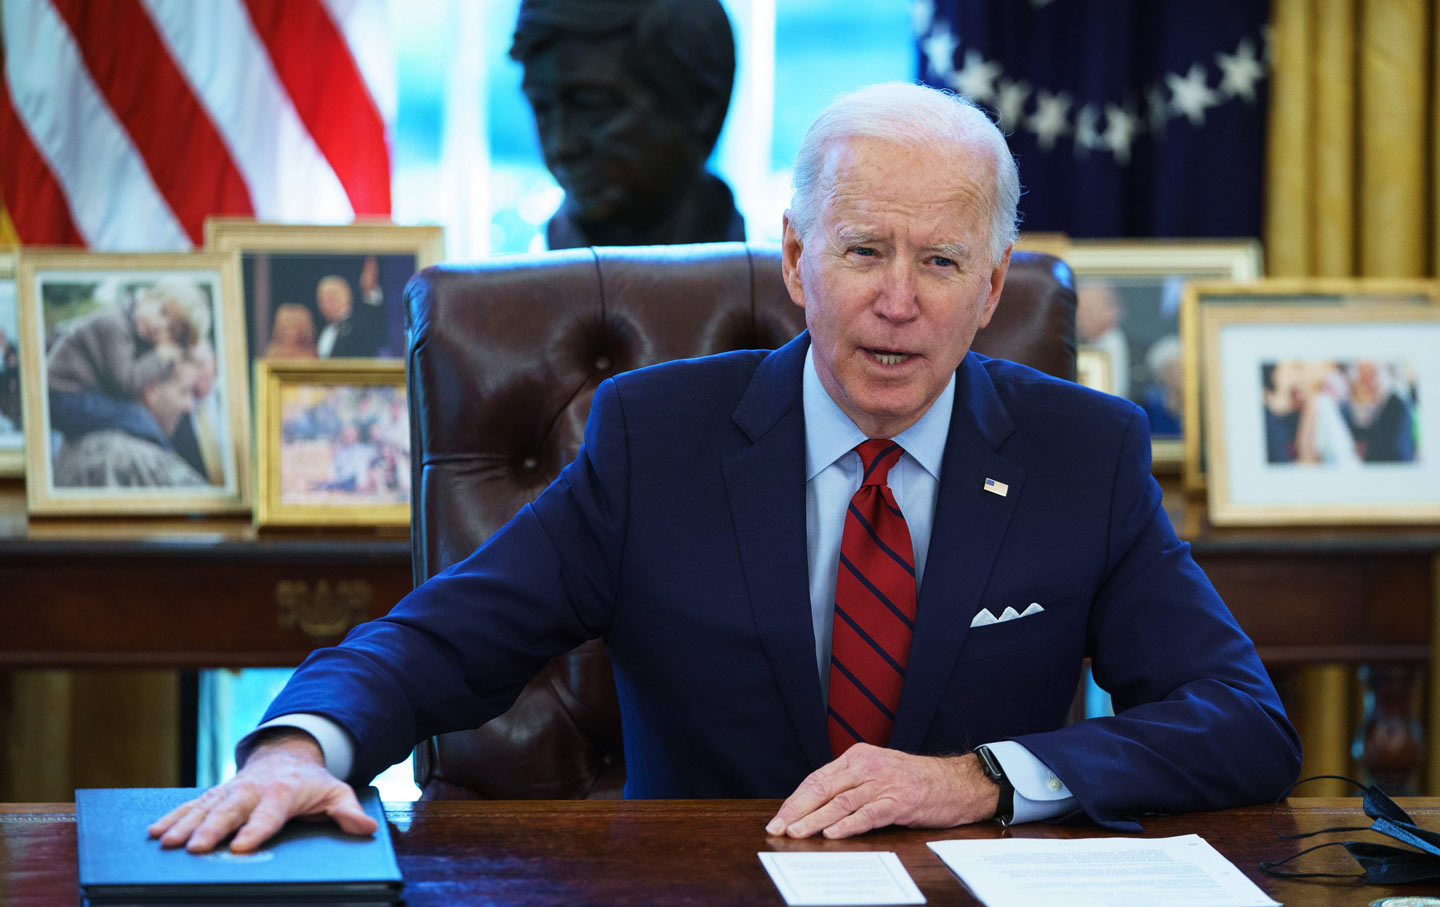 Biden Doesn’t Need and Shouldn’t Want the Votes of the Sedition Caucus or the Obstructionists